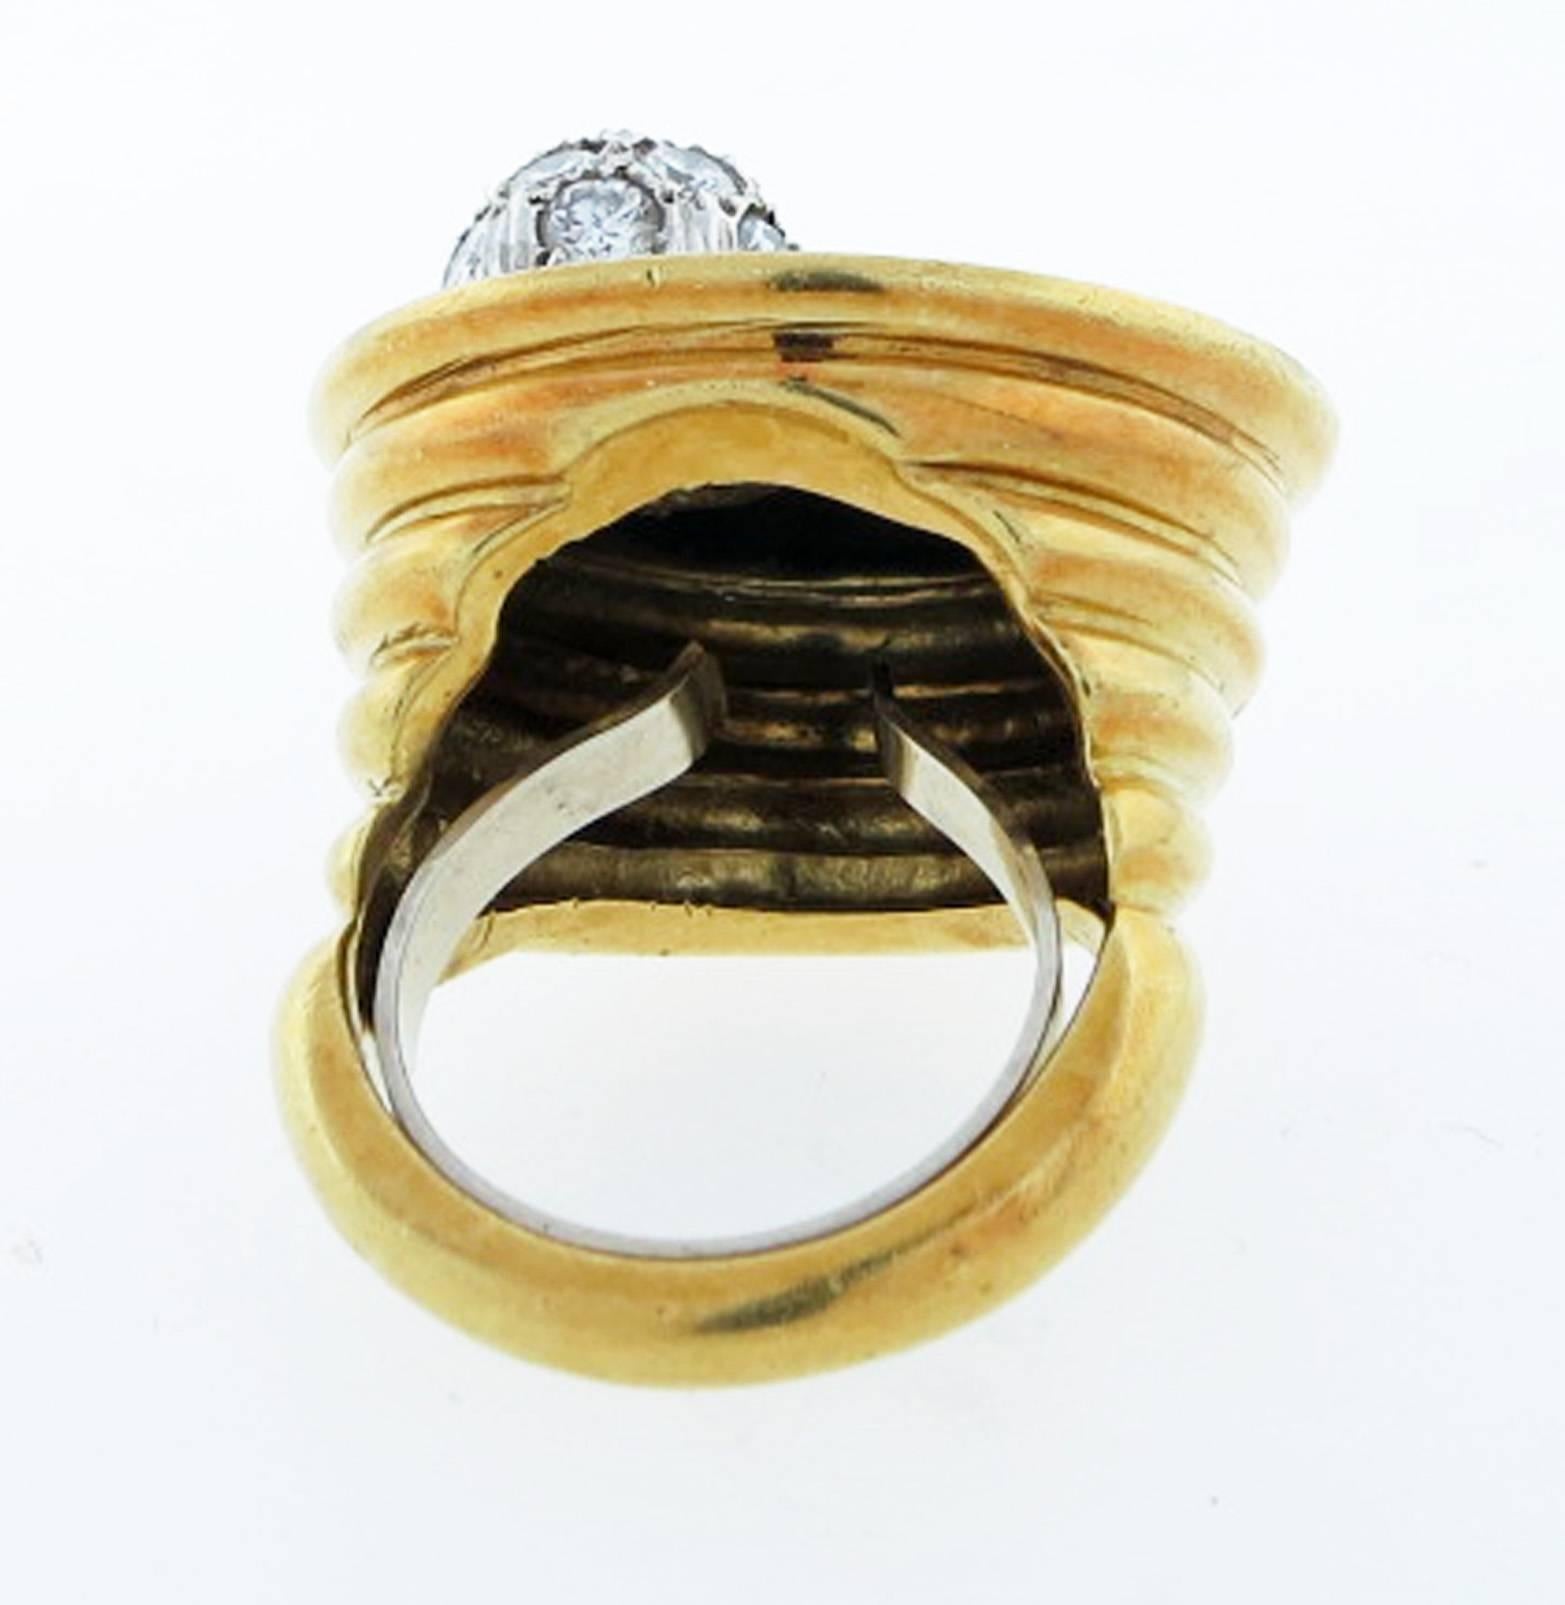 Fantastic and dimensional 18kt yellow gold ring by the American maker Le Triomphe. The ring measures 1 inch across the top and is set with black onyx with a diamond pave ball in white gold, the diamonds total approx .50cts. The tapered sides